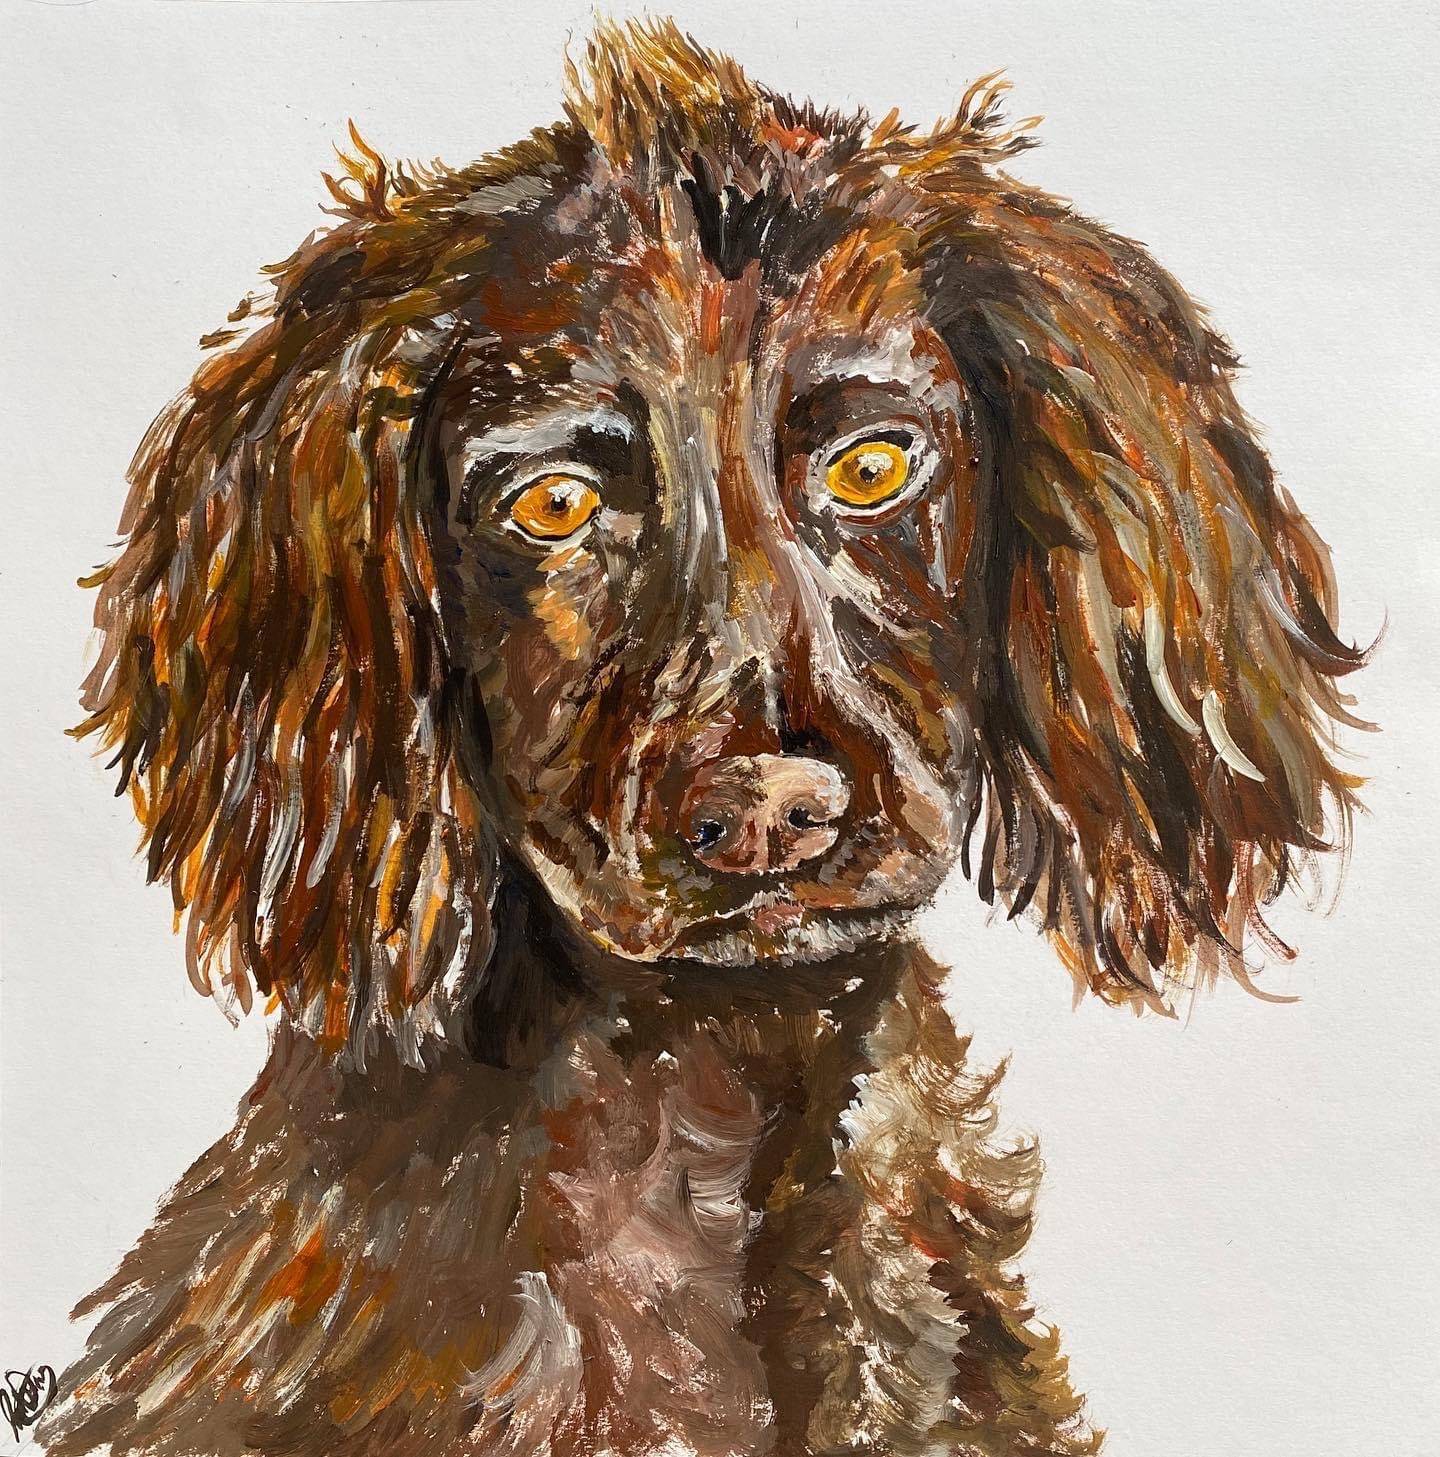 The Spaniel commission finished